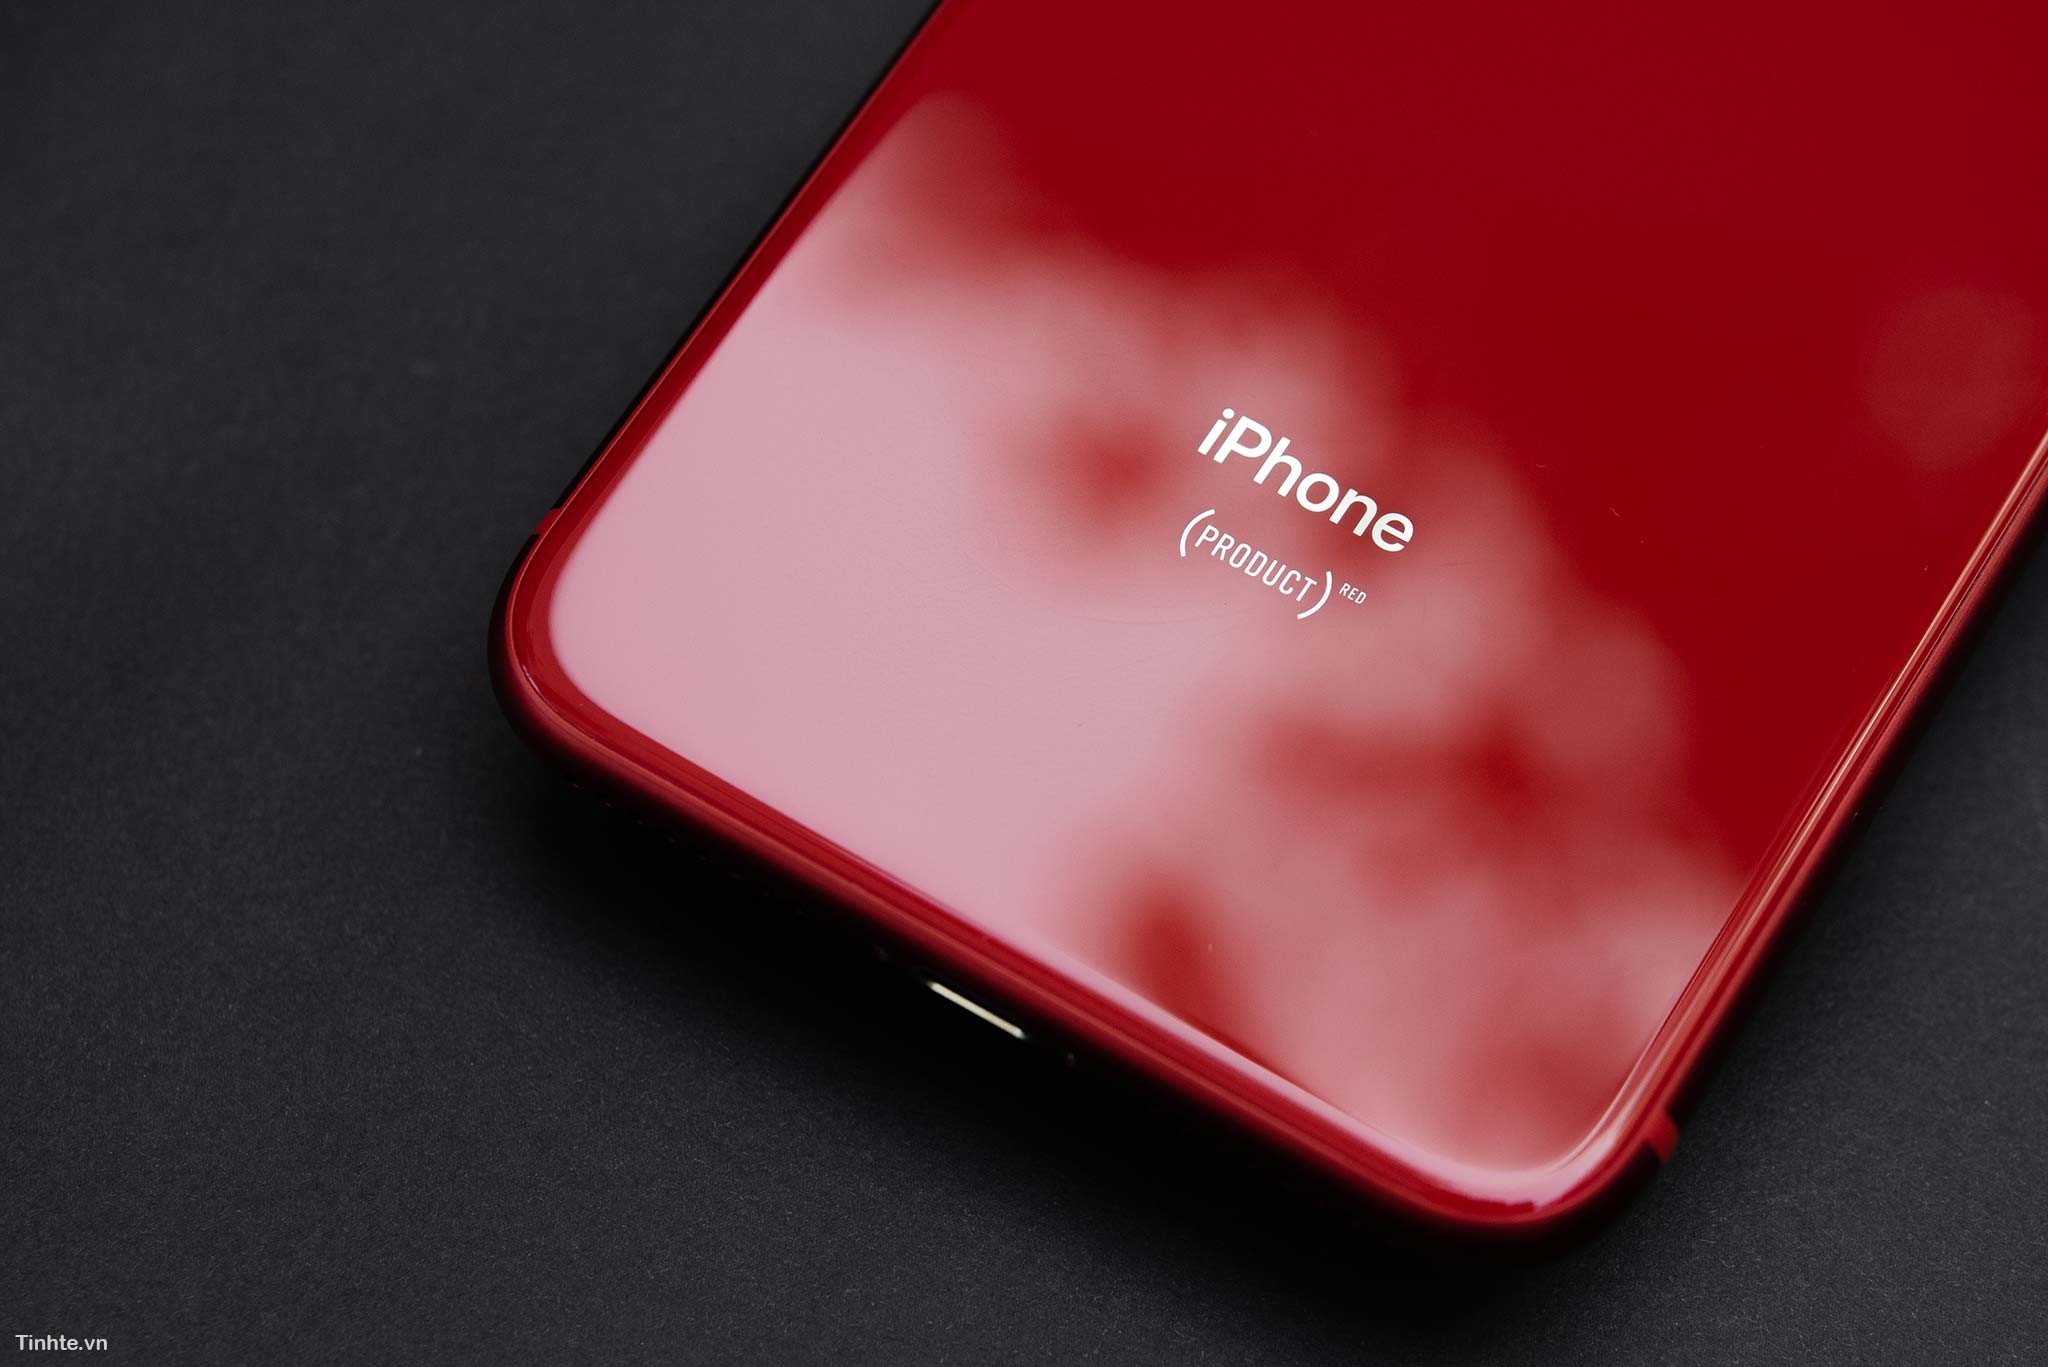 4287396_tinhte_tren_tay_apple_iphone_8_product_red_10.jpg